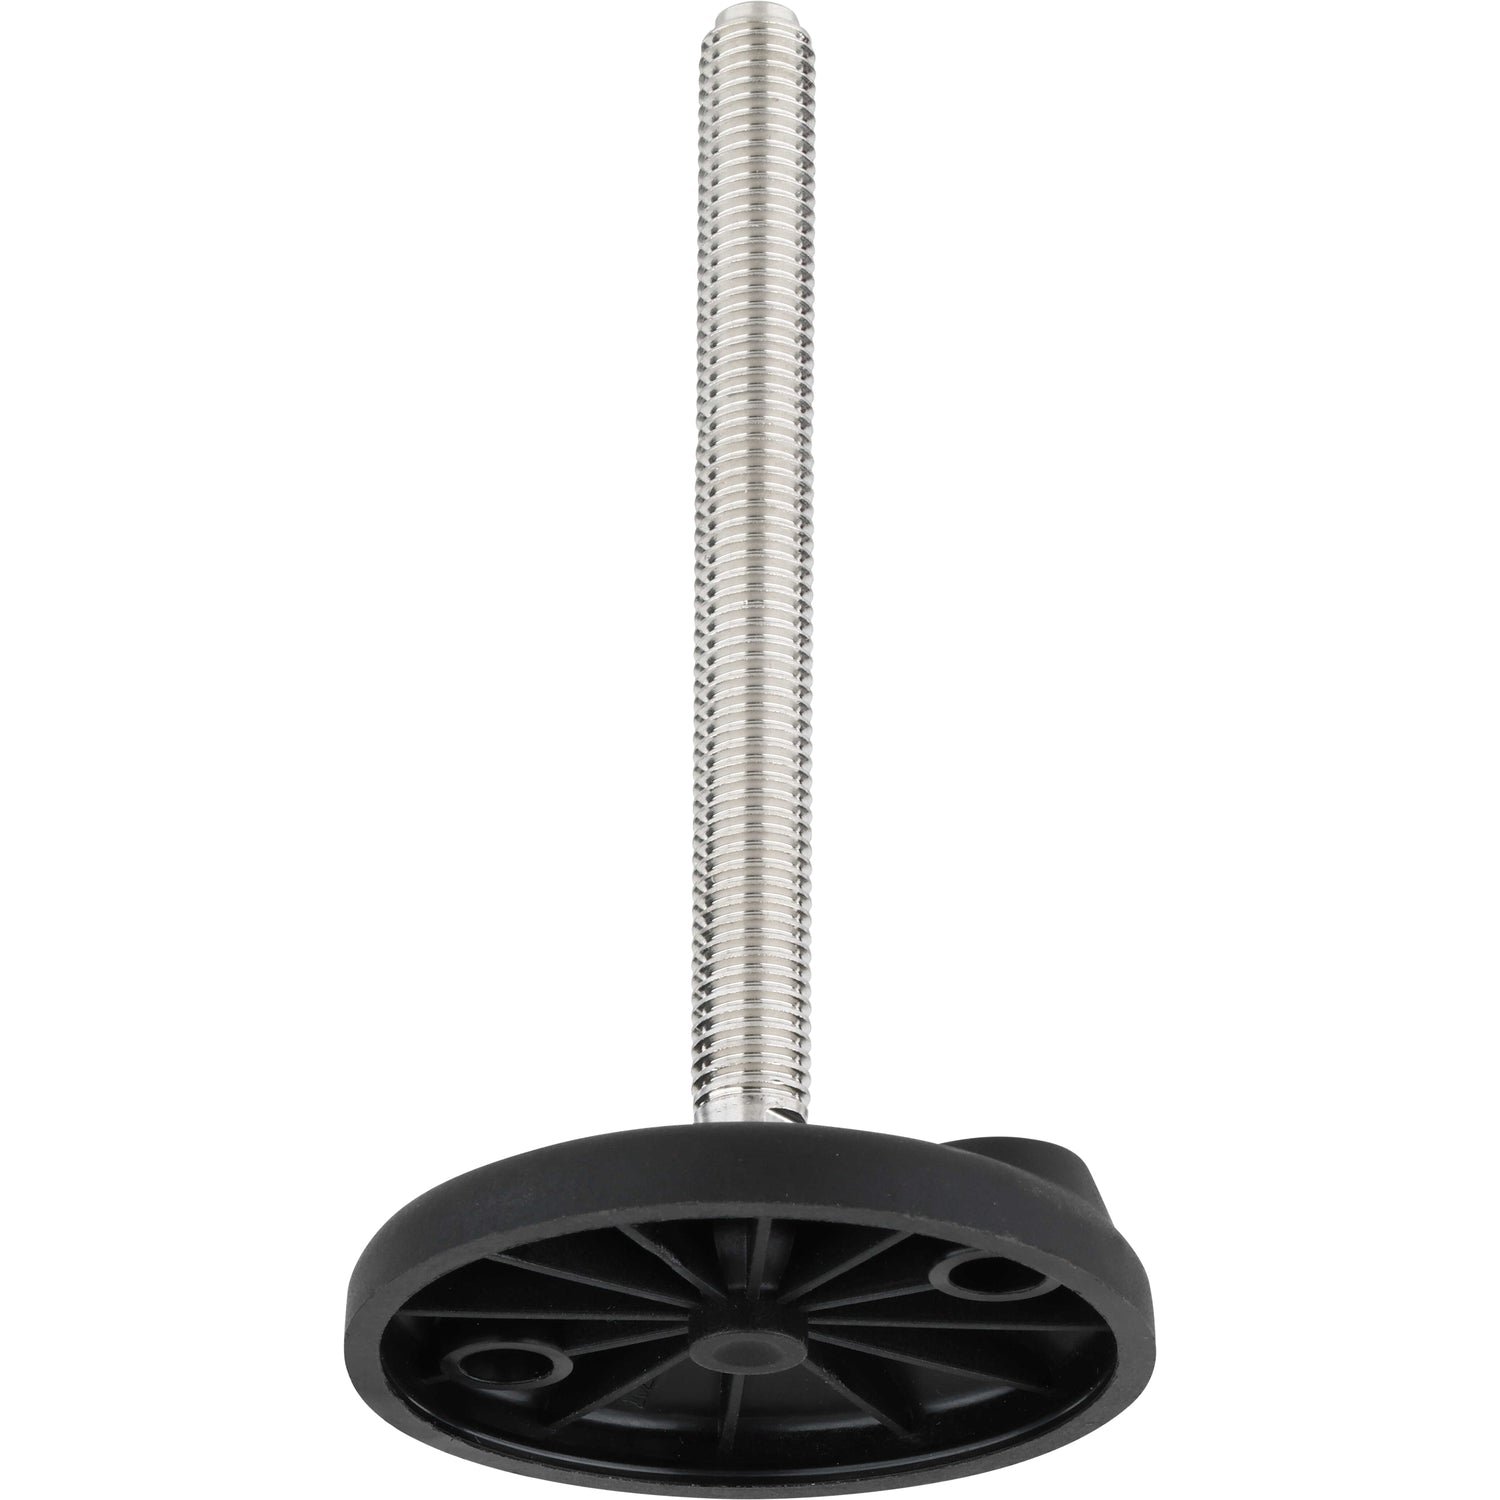 Threaded stainless steel post, pressed into a circular black plastic base. Shown on a white background.